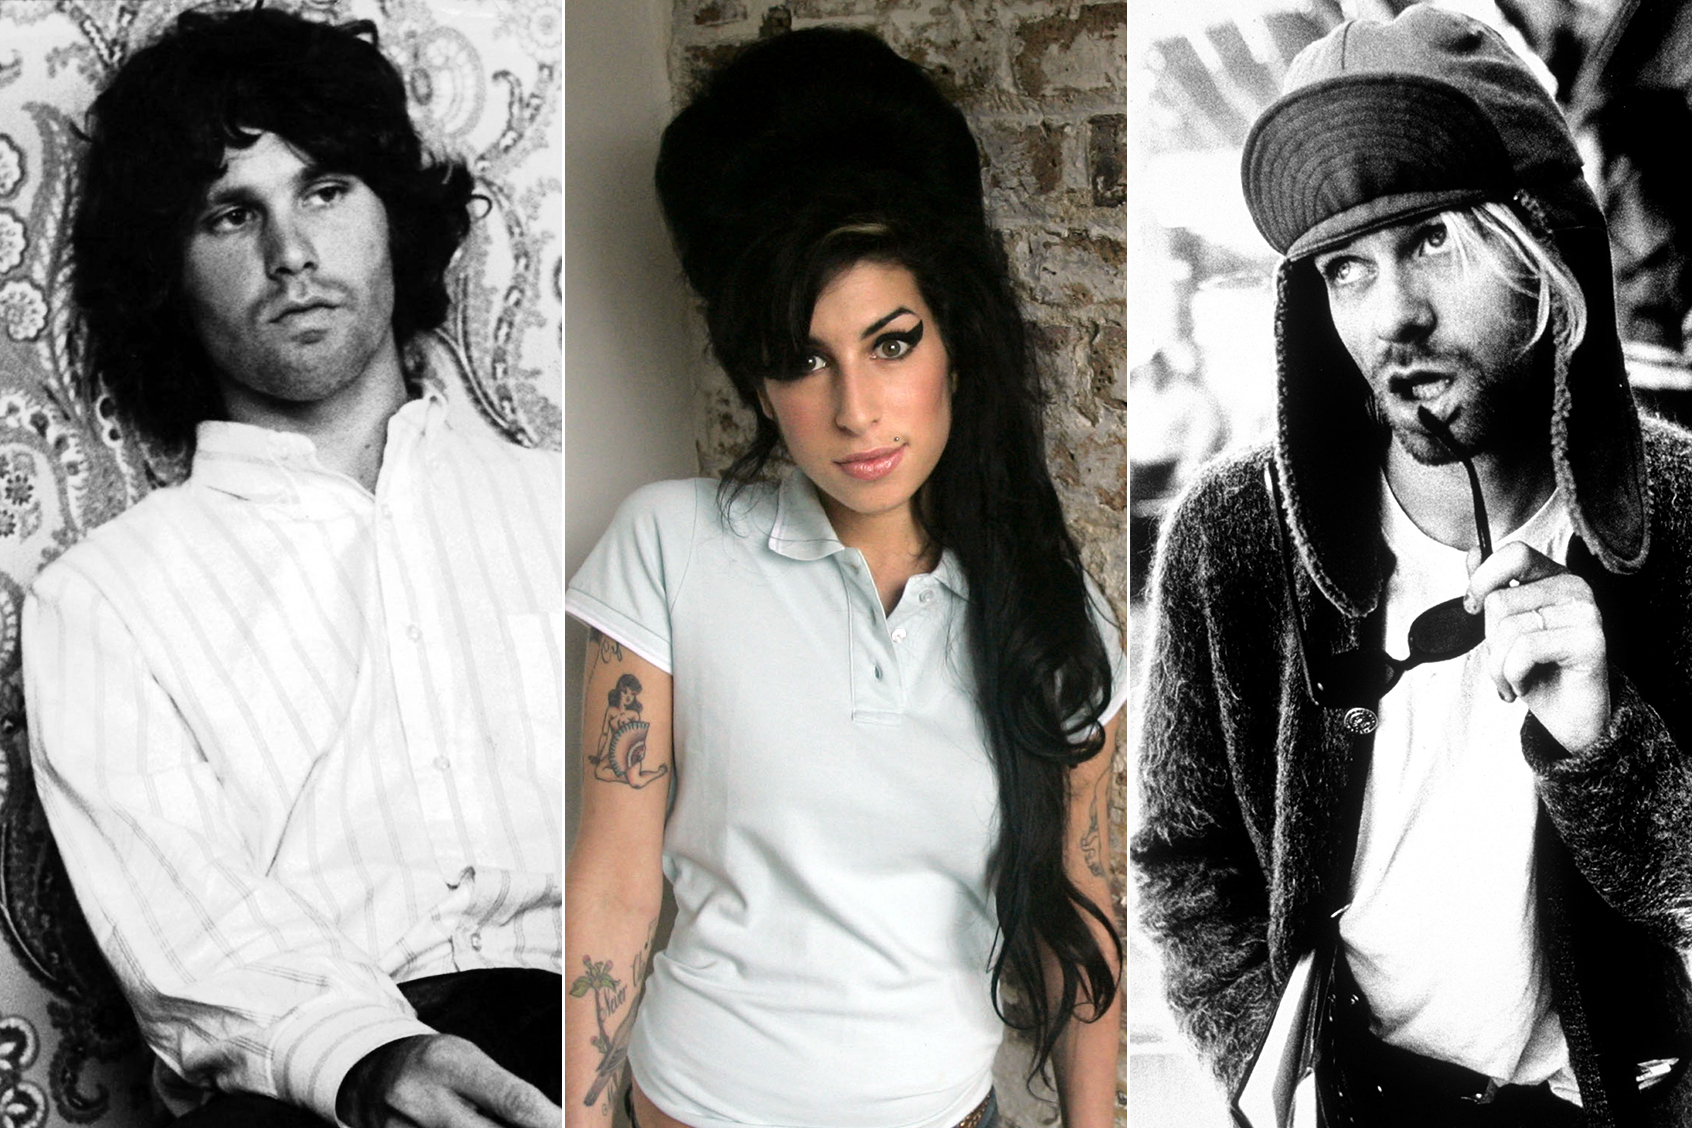 A Brief History of the 27 Club pic